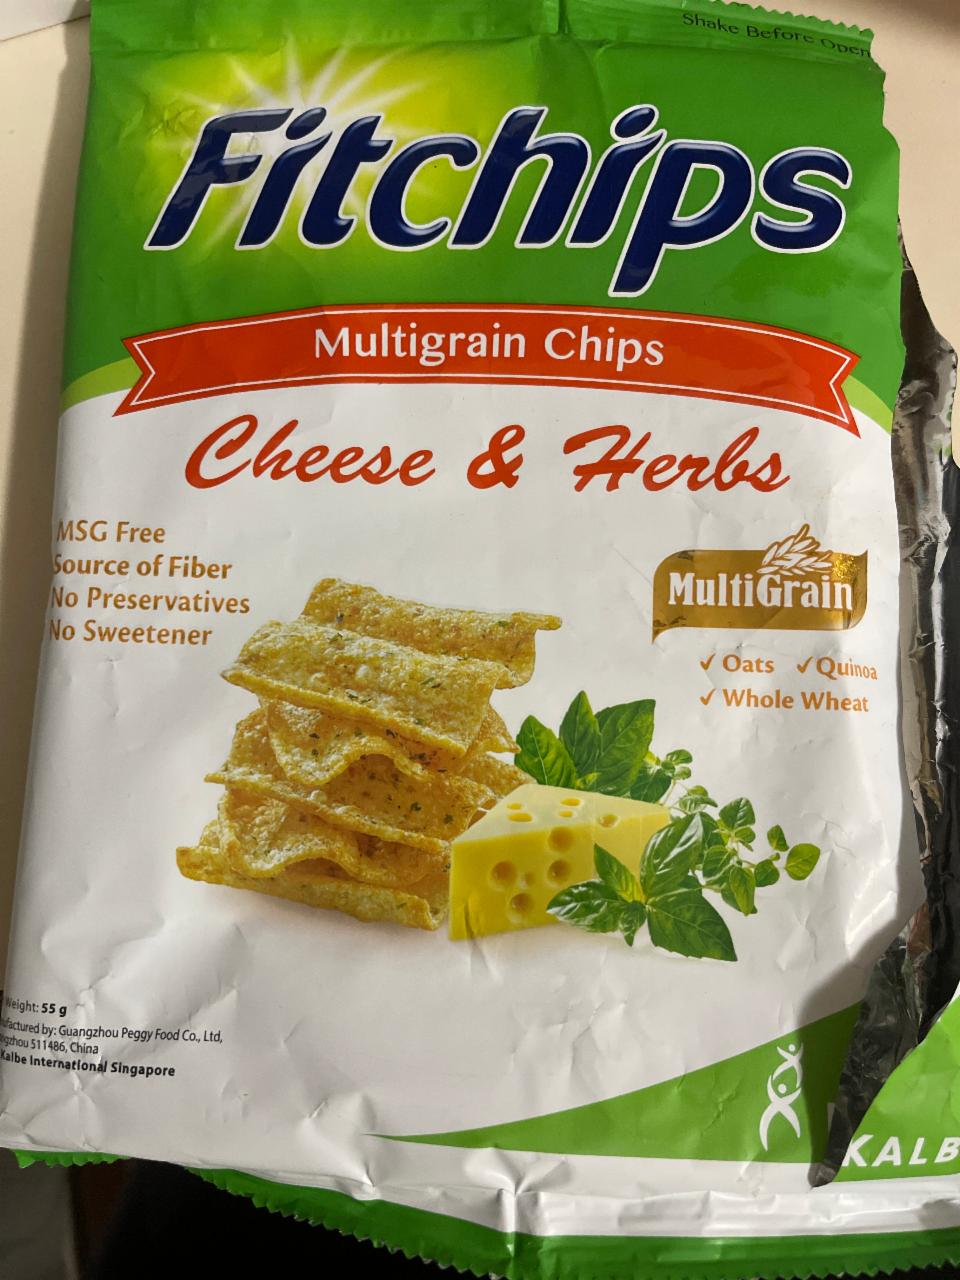 Fotografie - Multigrain Chips Cheese & Herbs Fitchips